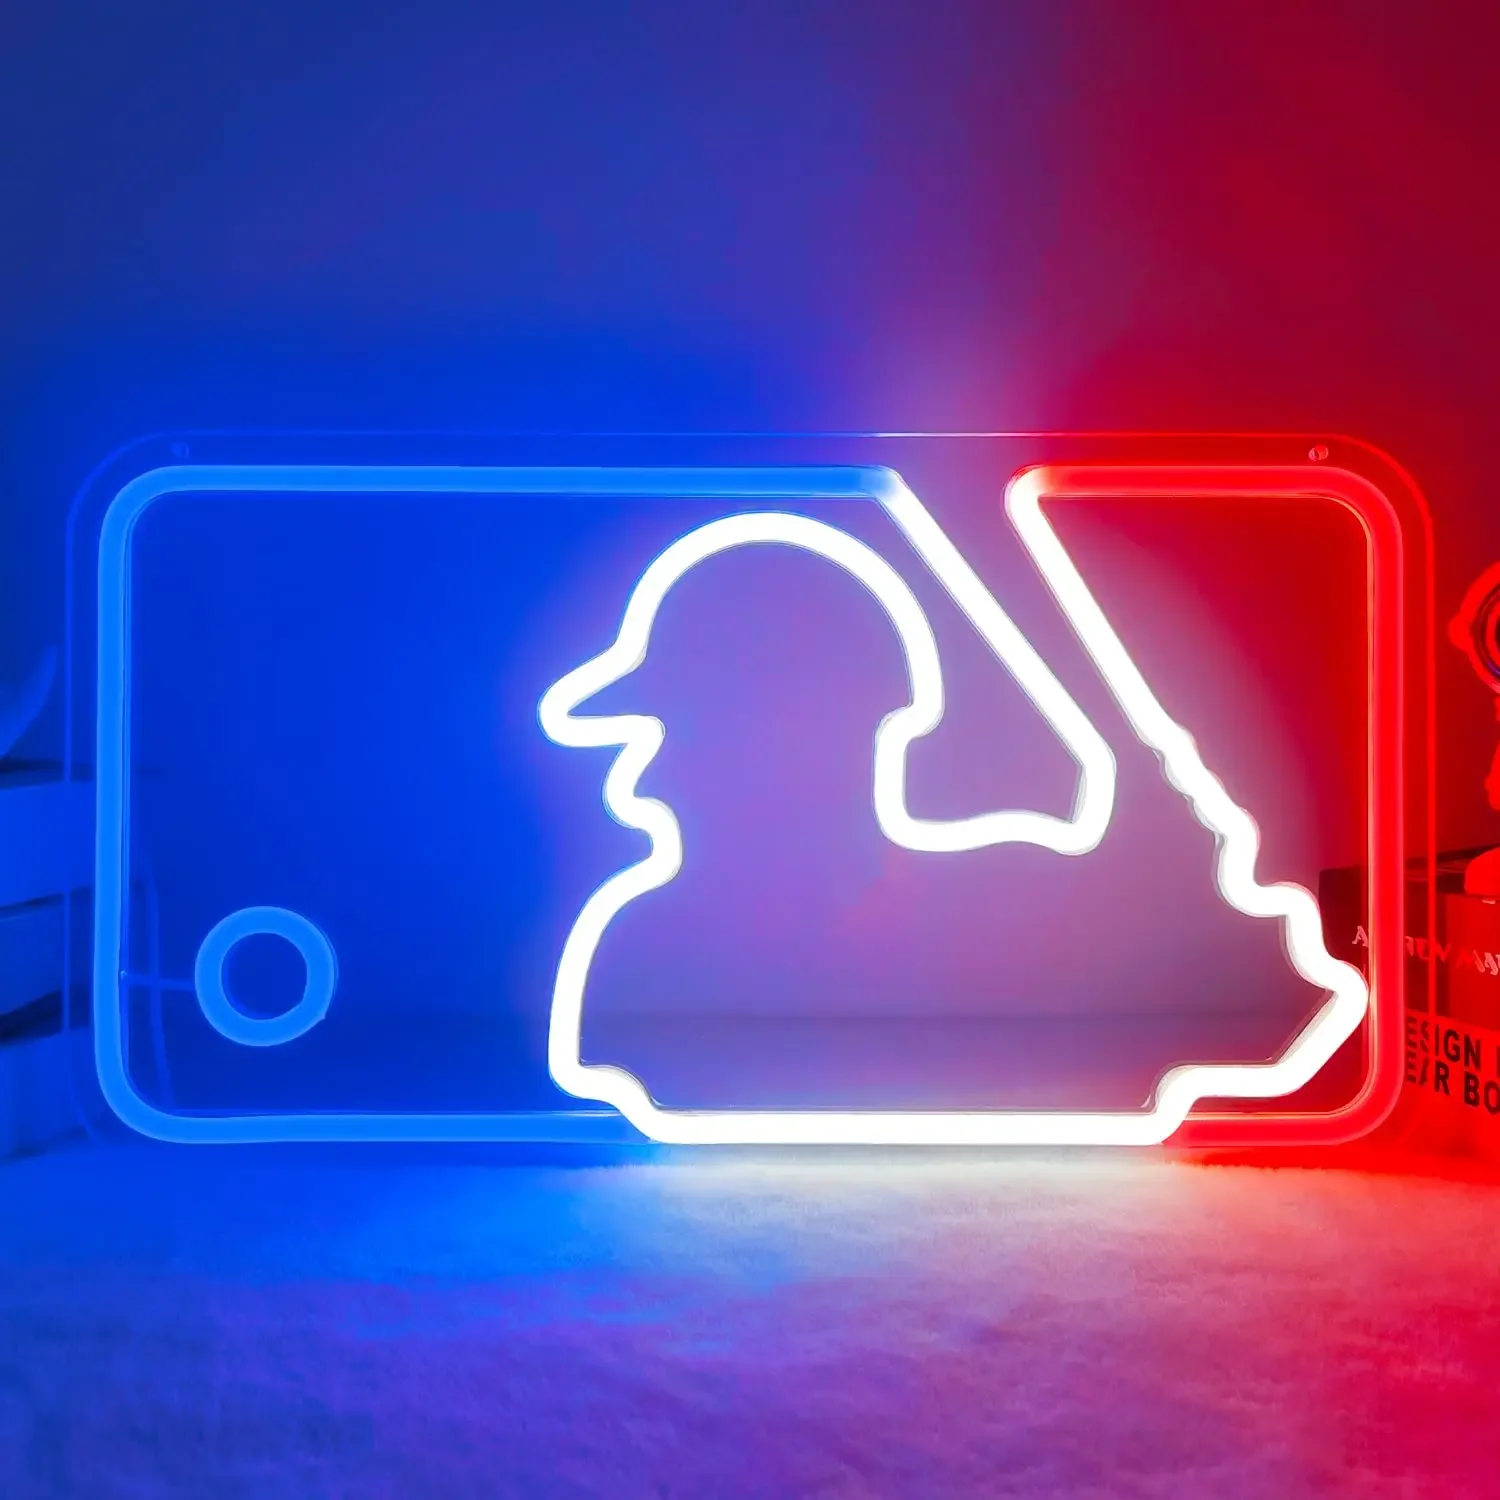 

Baseball Neon Lights Signs Light Up Walls, Illuminating Sport Club Bars and Boys' Rooms with Dimmable LED Ambiance